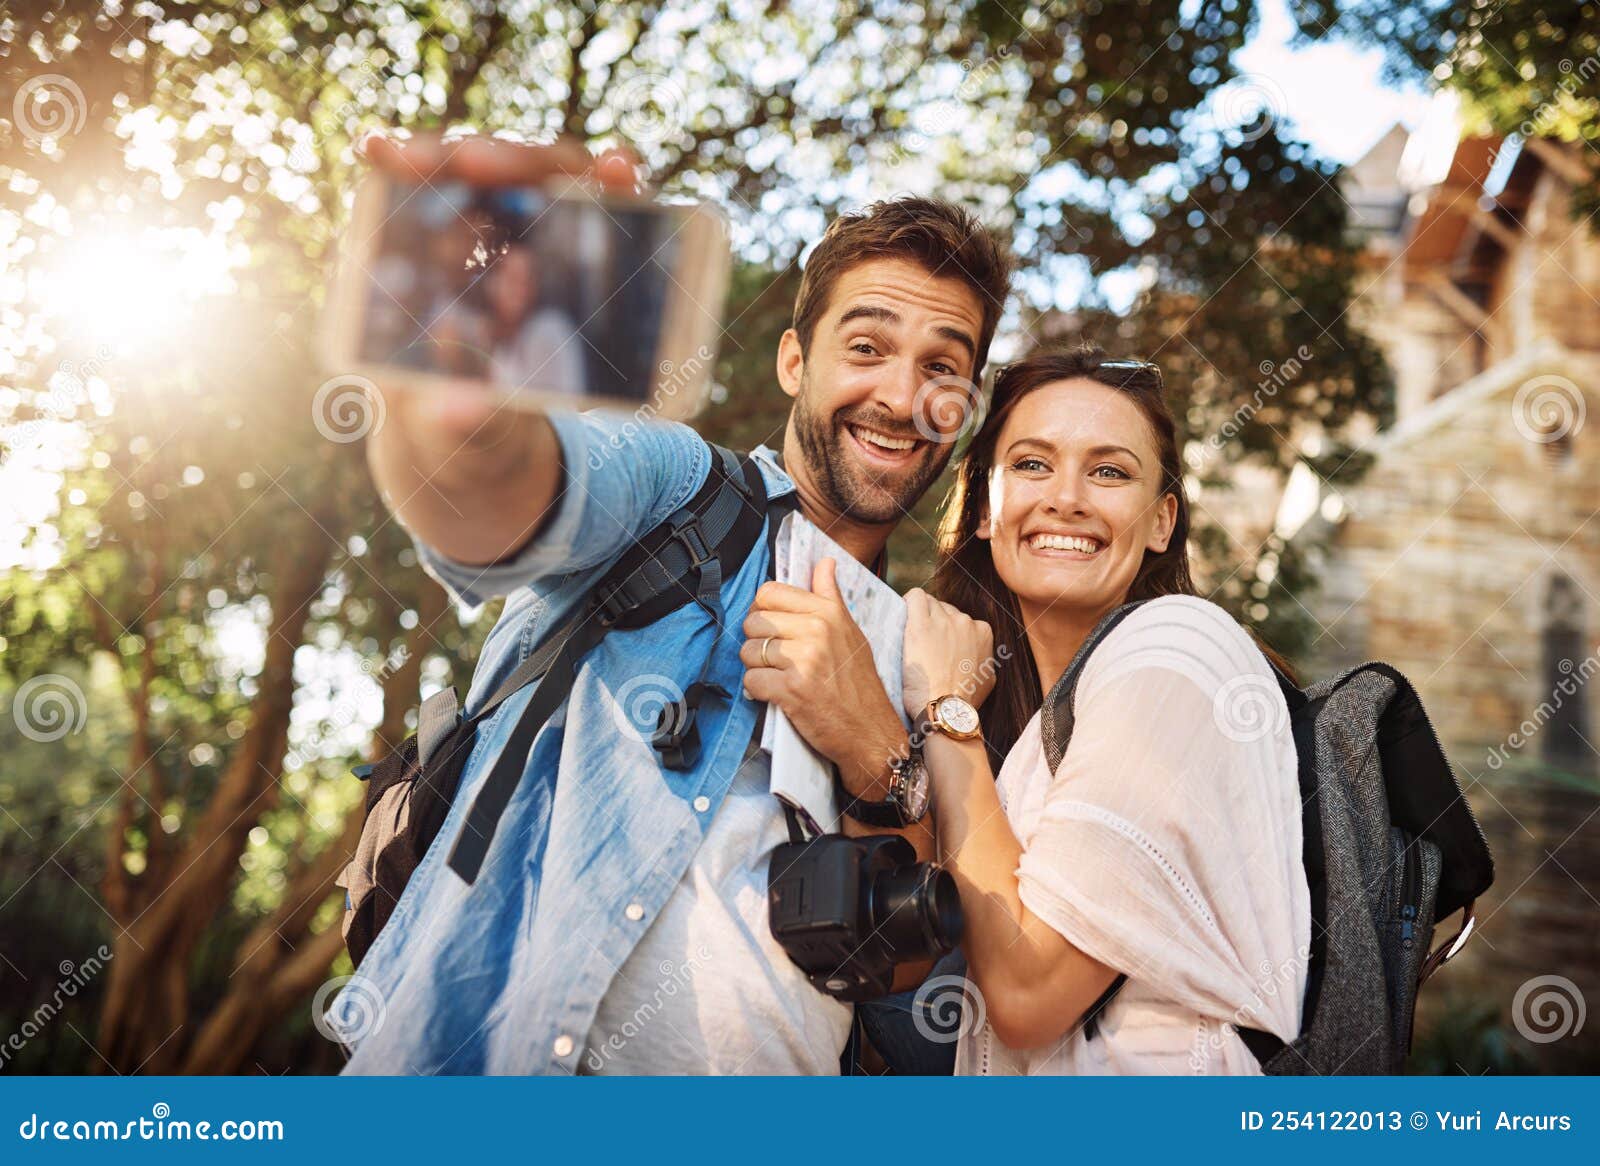 Couple posing for selfie near campfire - Stock Image - F016/6942 - Science  Photo Library